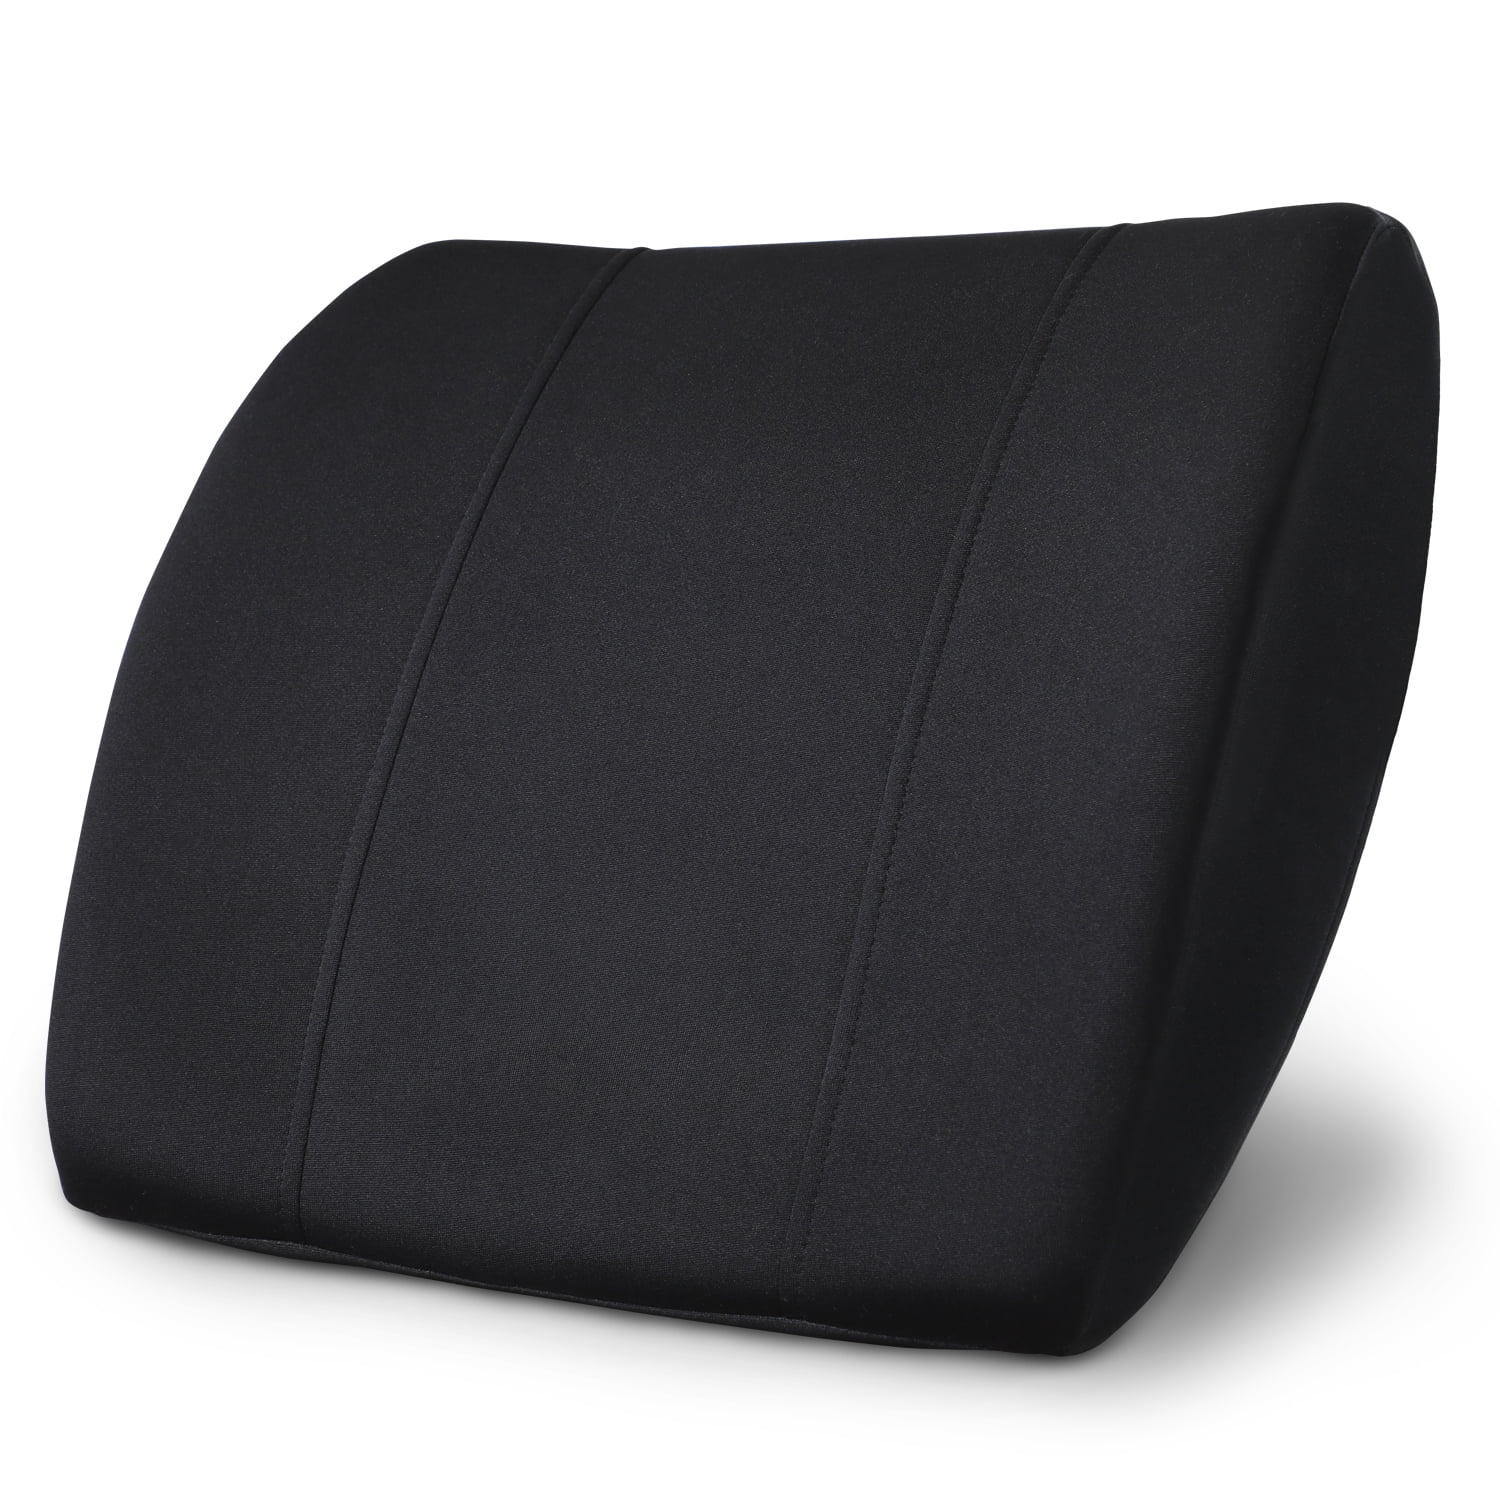  N NeoCushion Lumbar Support Pillow for Office Chair,Couch,Car  Seat Driver,Recliner and Bed,Neo Cushion Ergonomic Memory Foam Lumbar Pillow  for Low Back Pain Relief, for Sleeping(Black) : Home & Kitchen